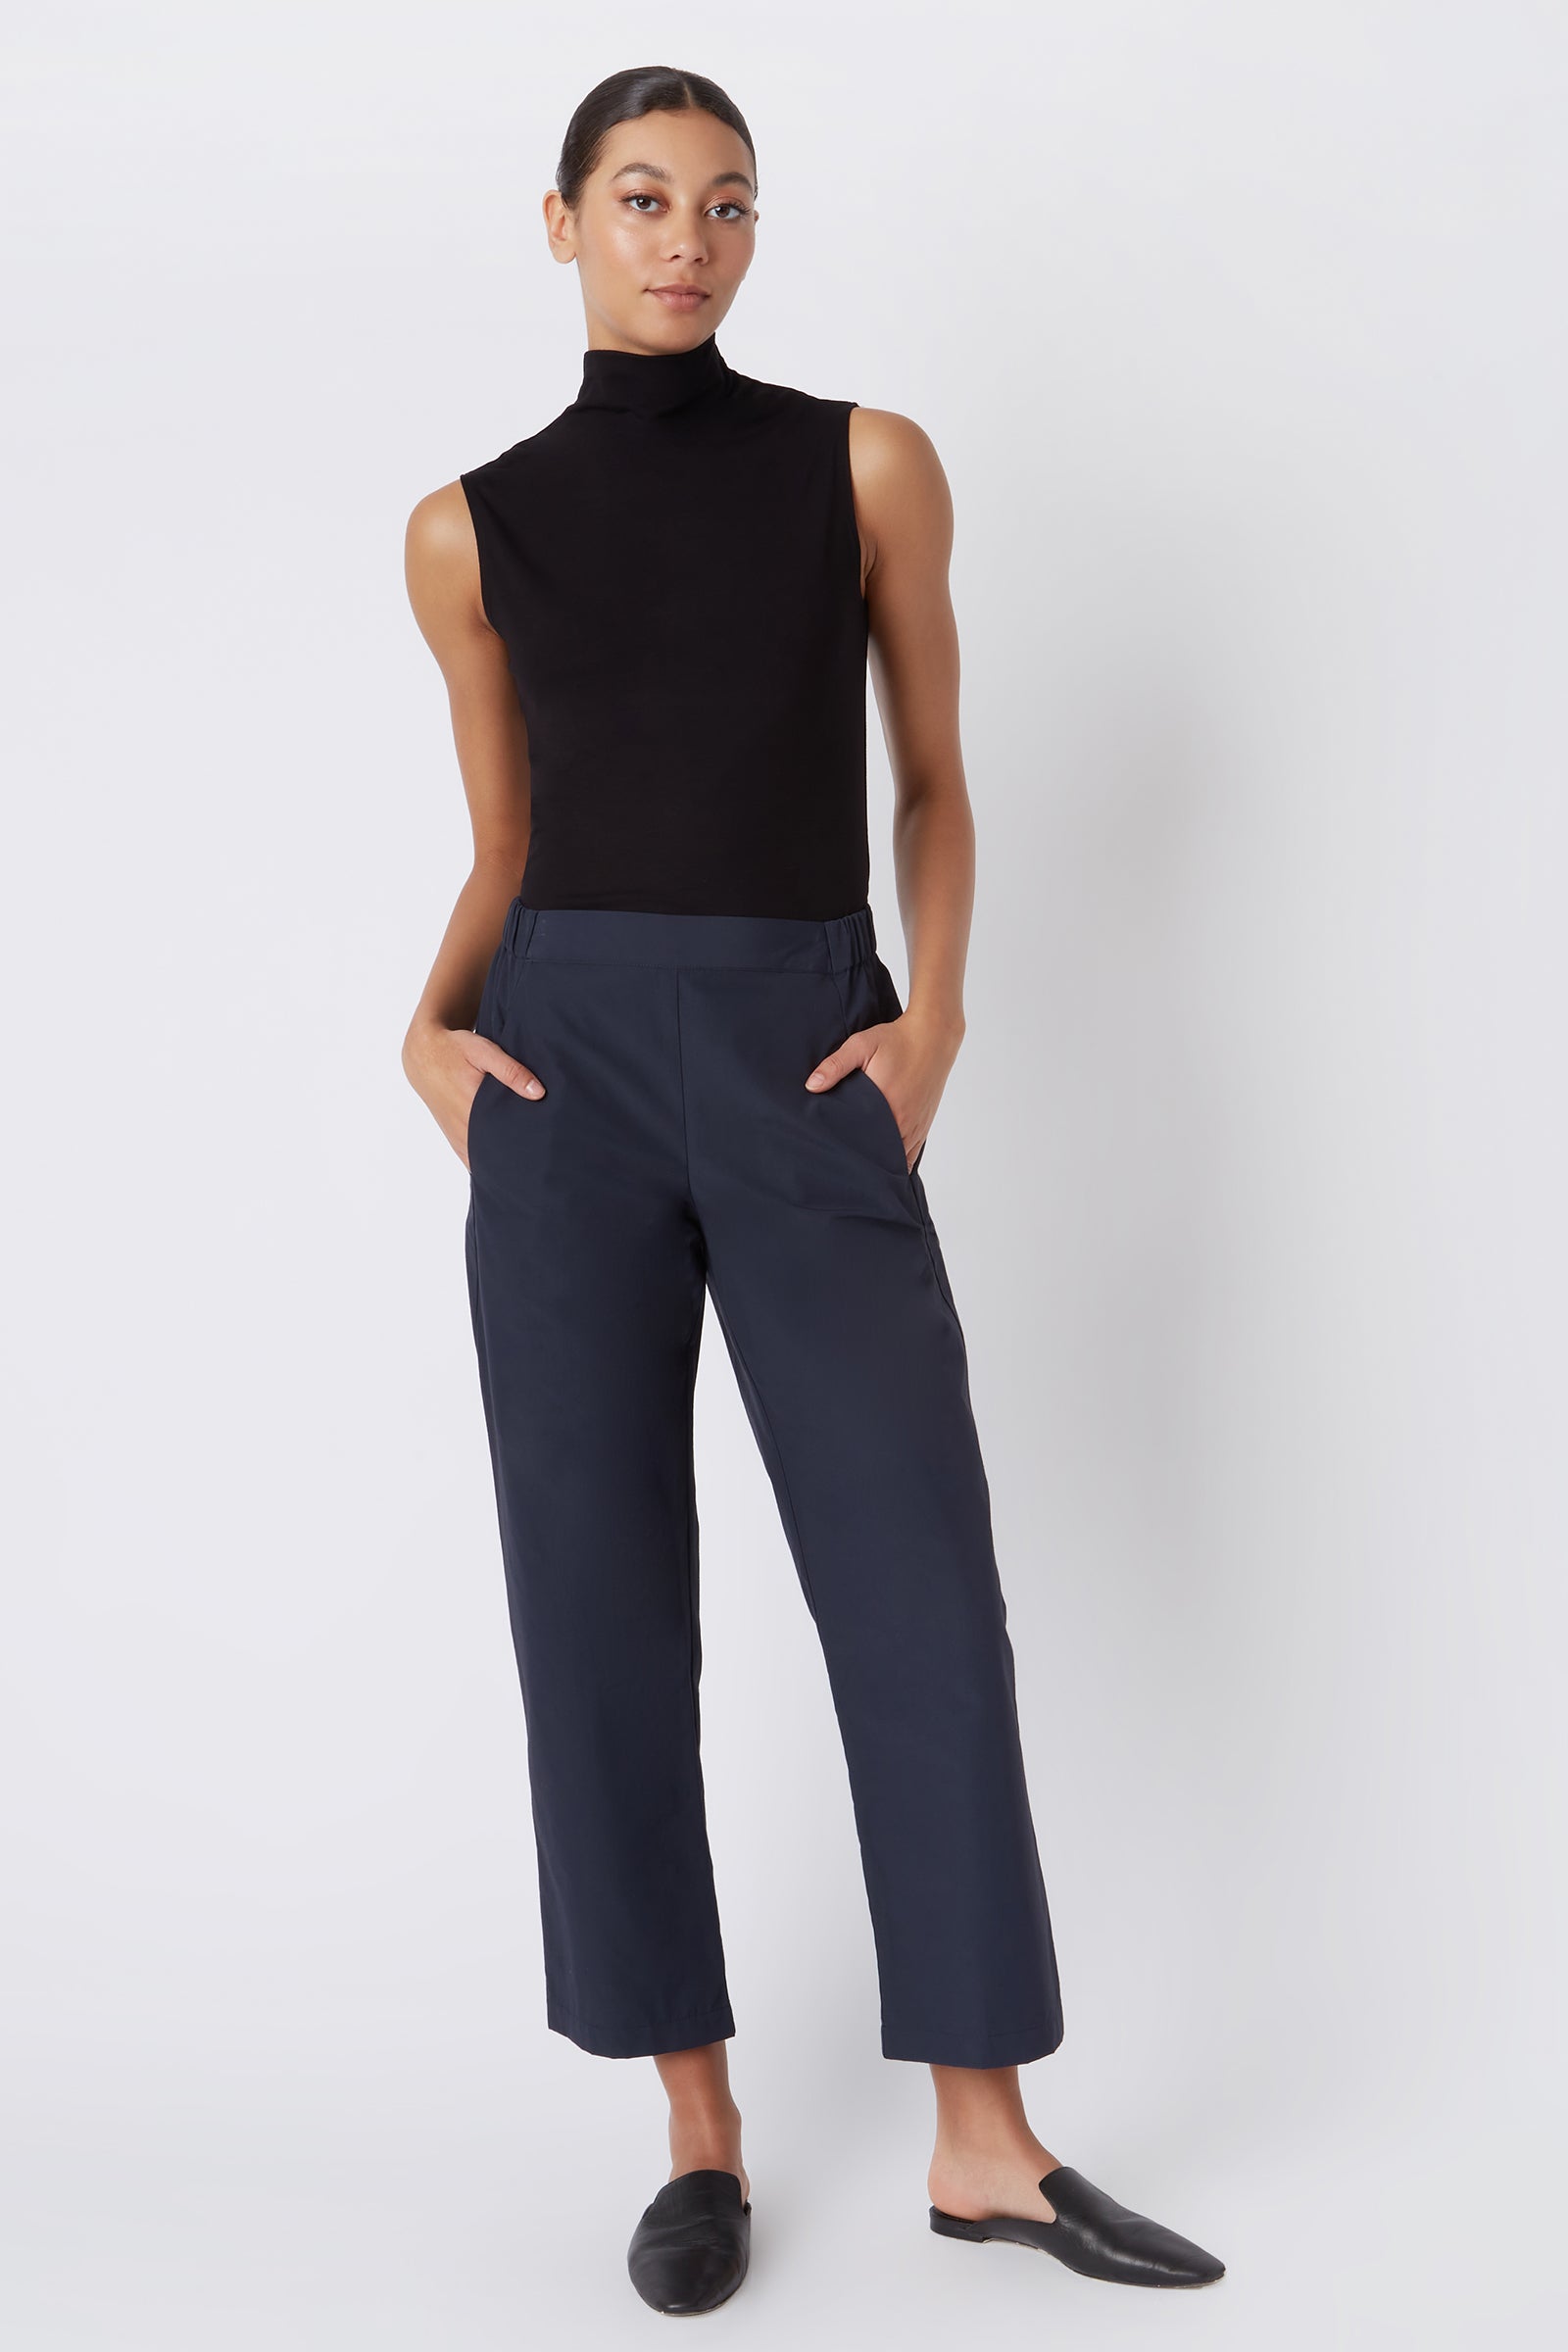 Kal Rieman Brit Crop Pant in Navy on Model with Hands in Pockets Full Front View